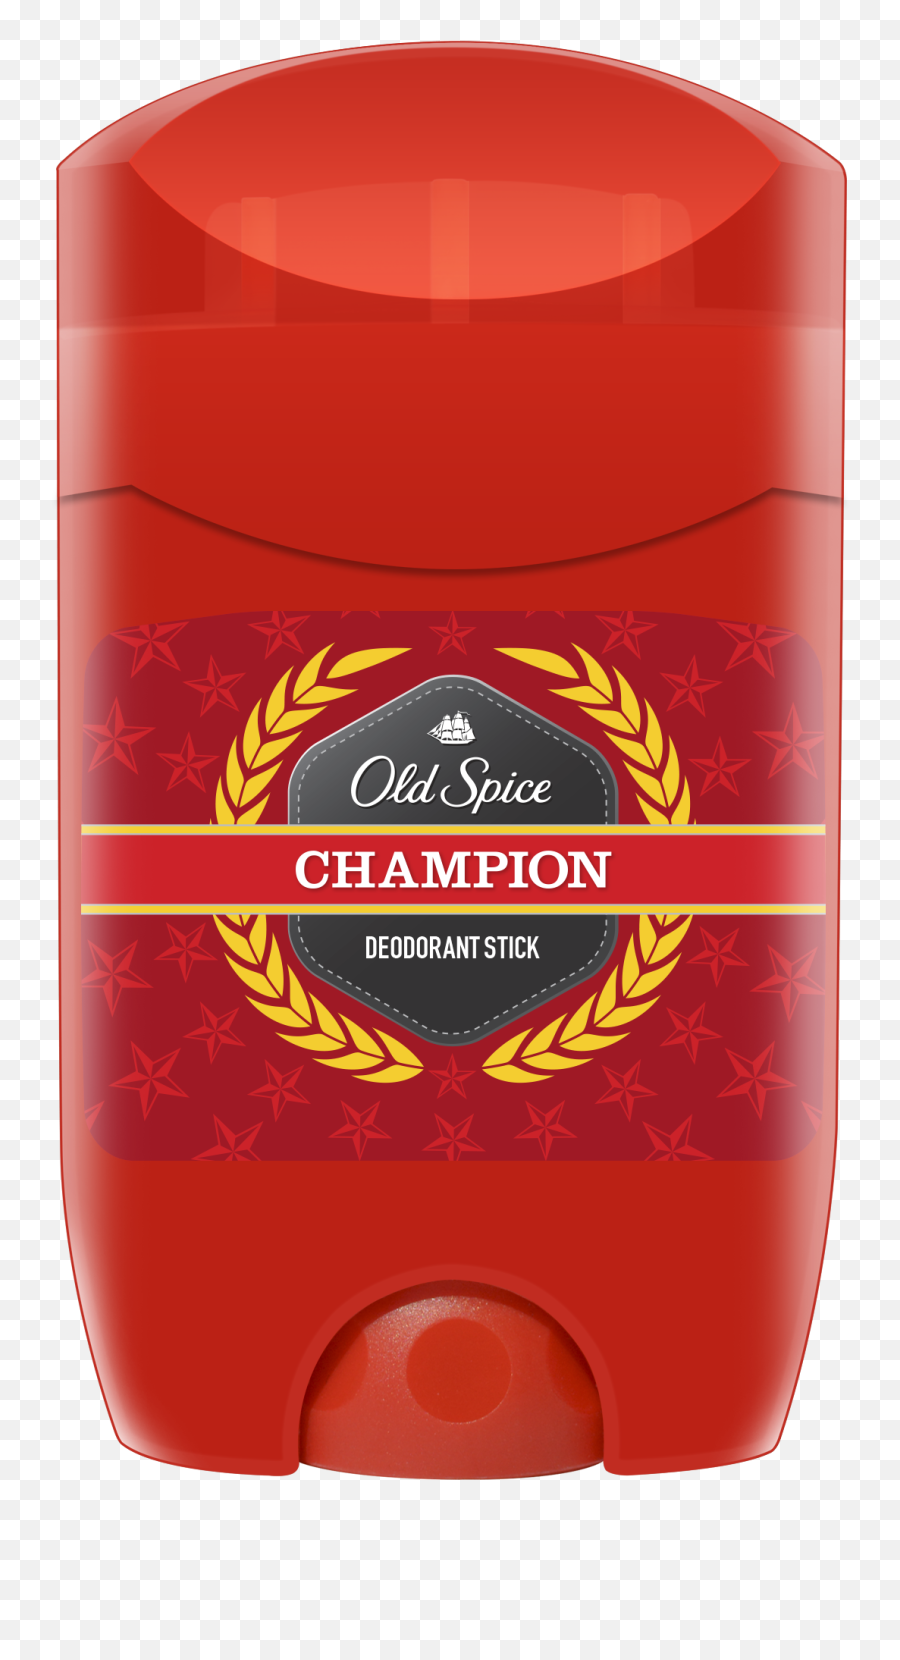 Old Spice Champion Deodorant Stick Png - Old Spice Red Collection Deodorant,Old Spice Logo